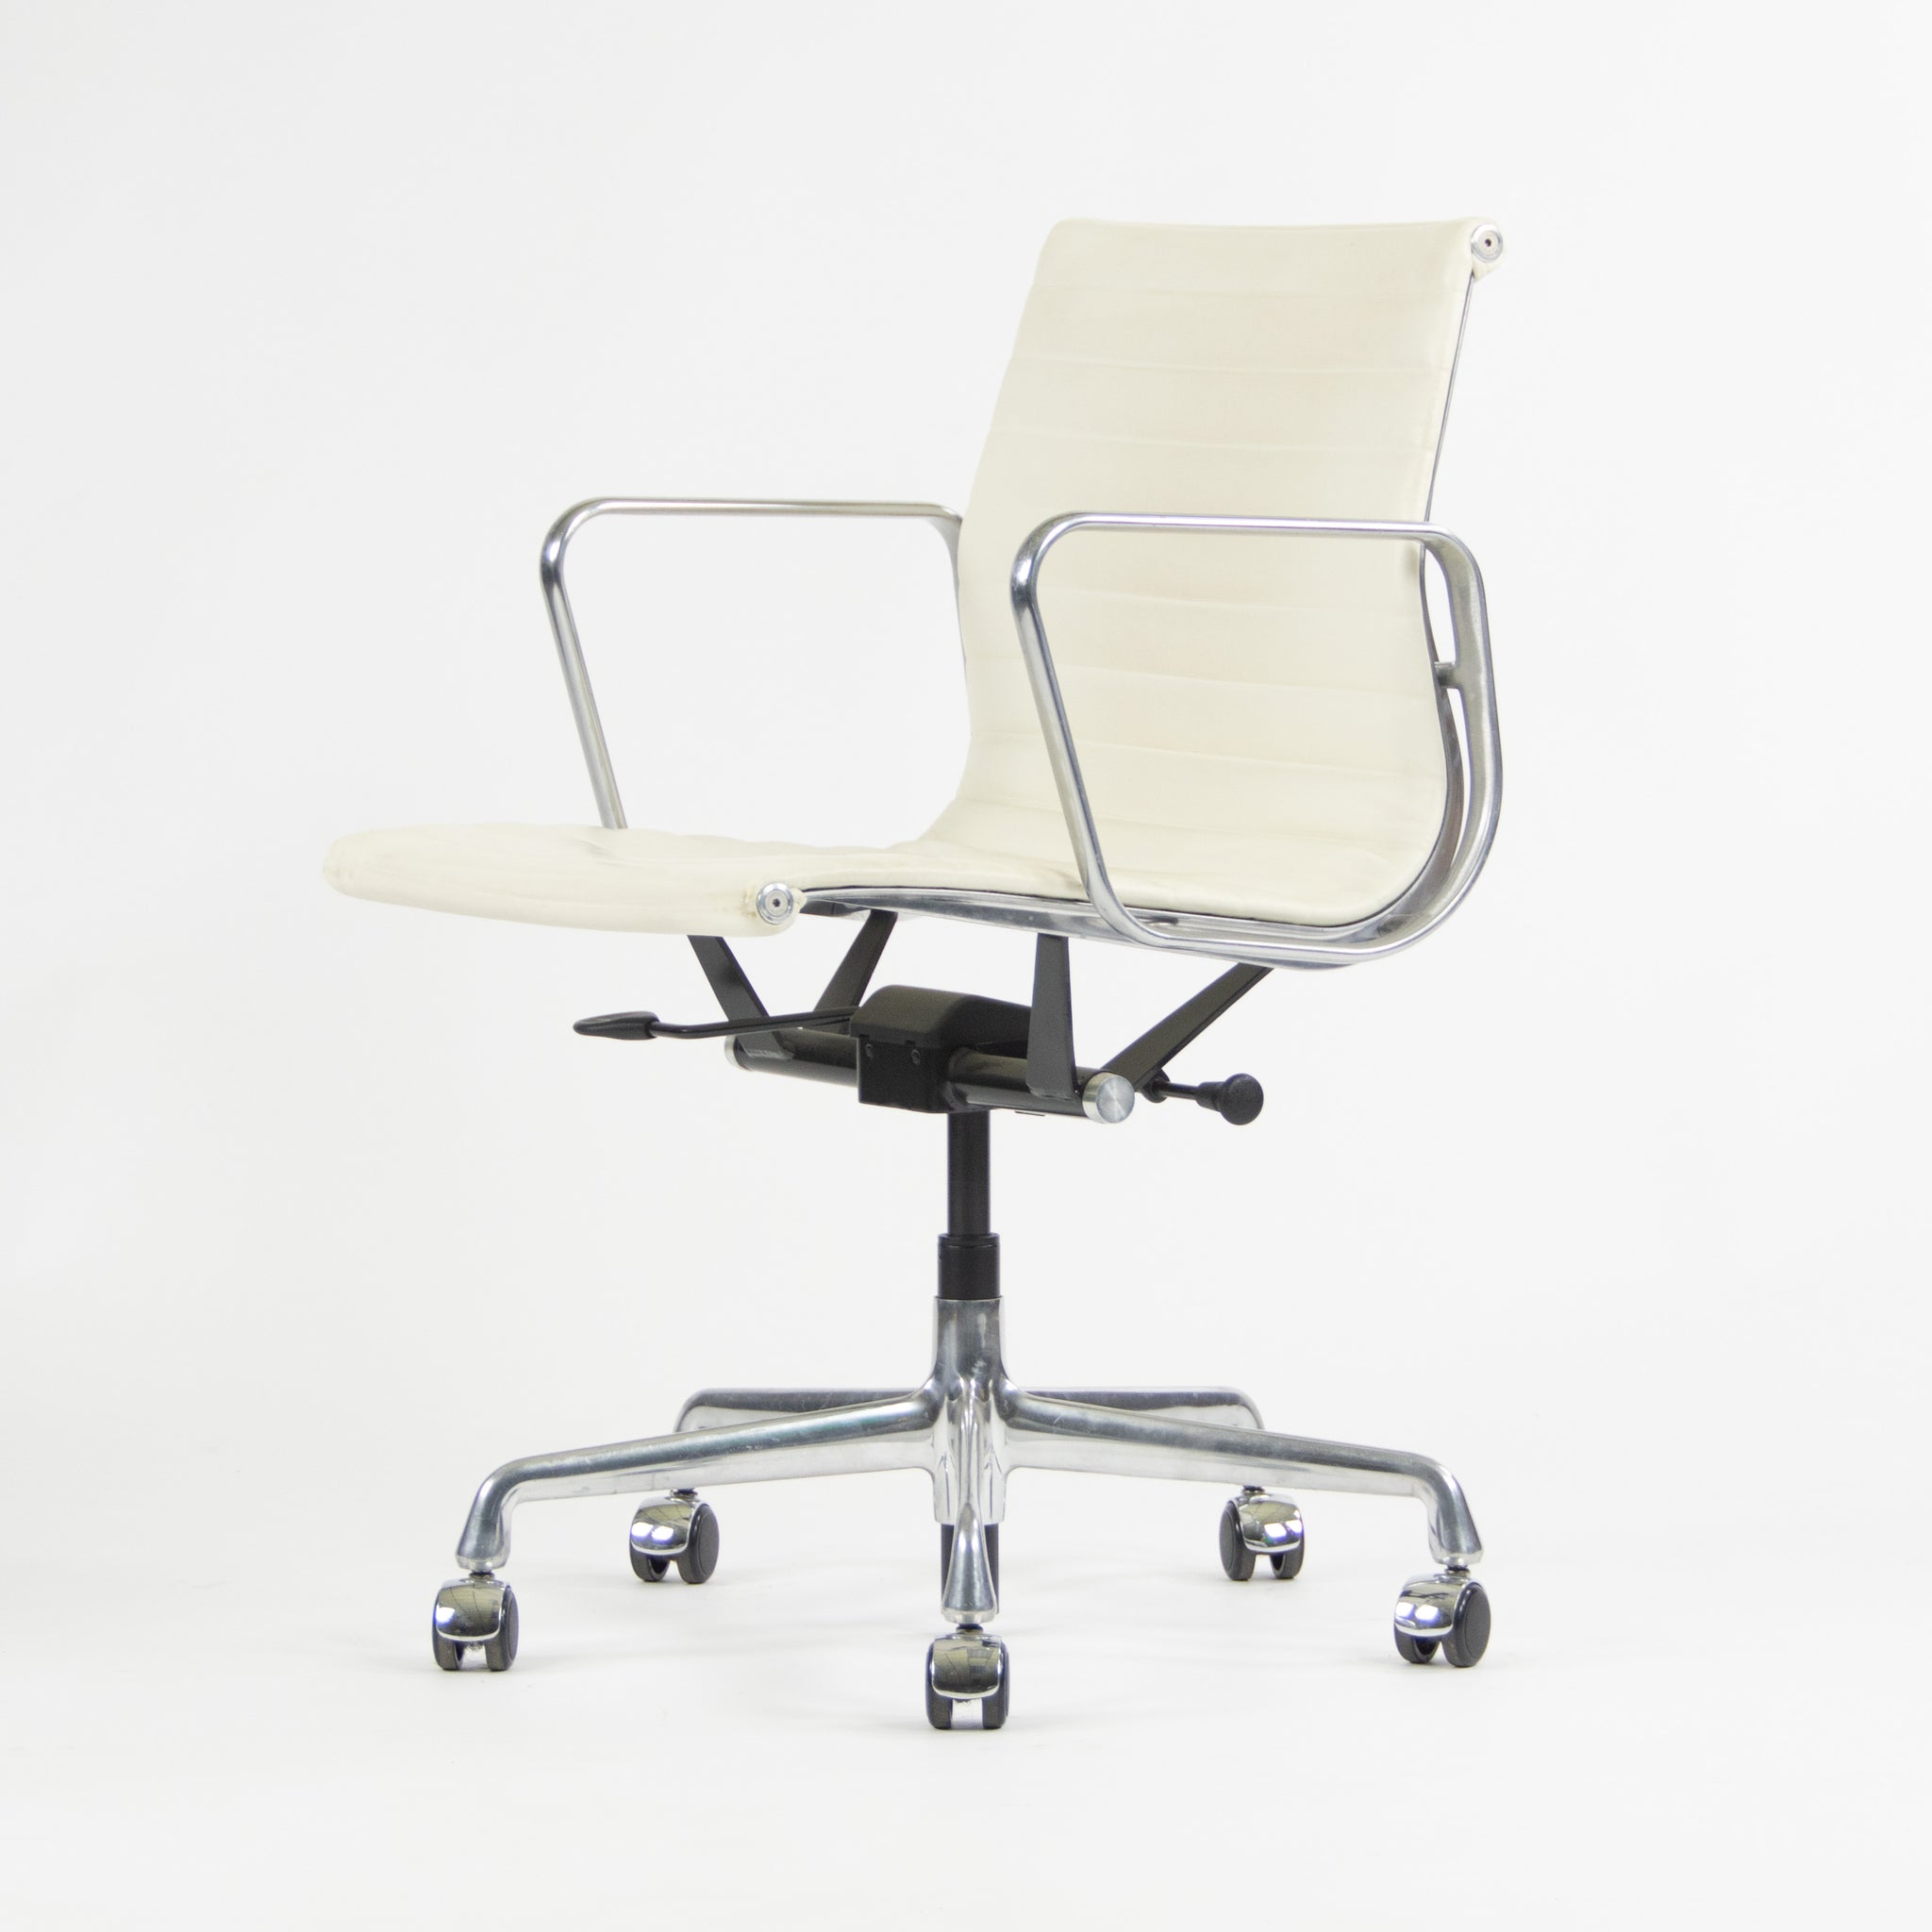 SOLD Herman Miller Eames 2012 Aluminum Group Management Desk Chair 6x Available White